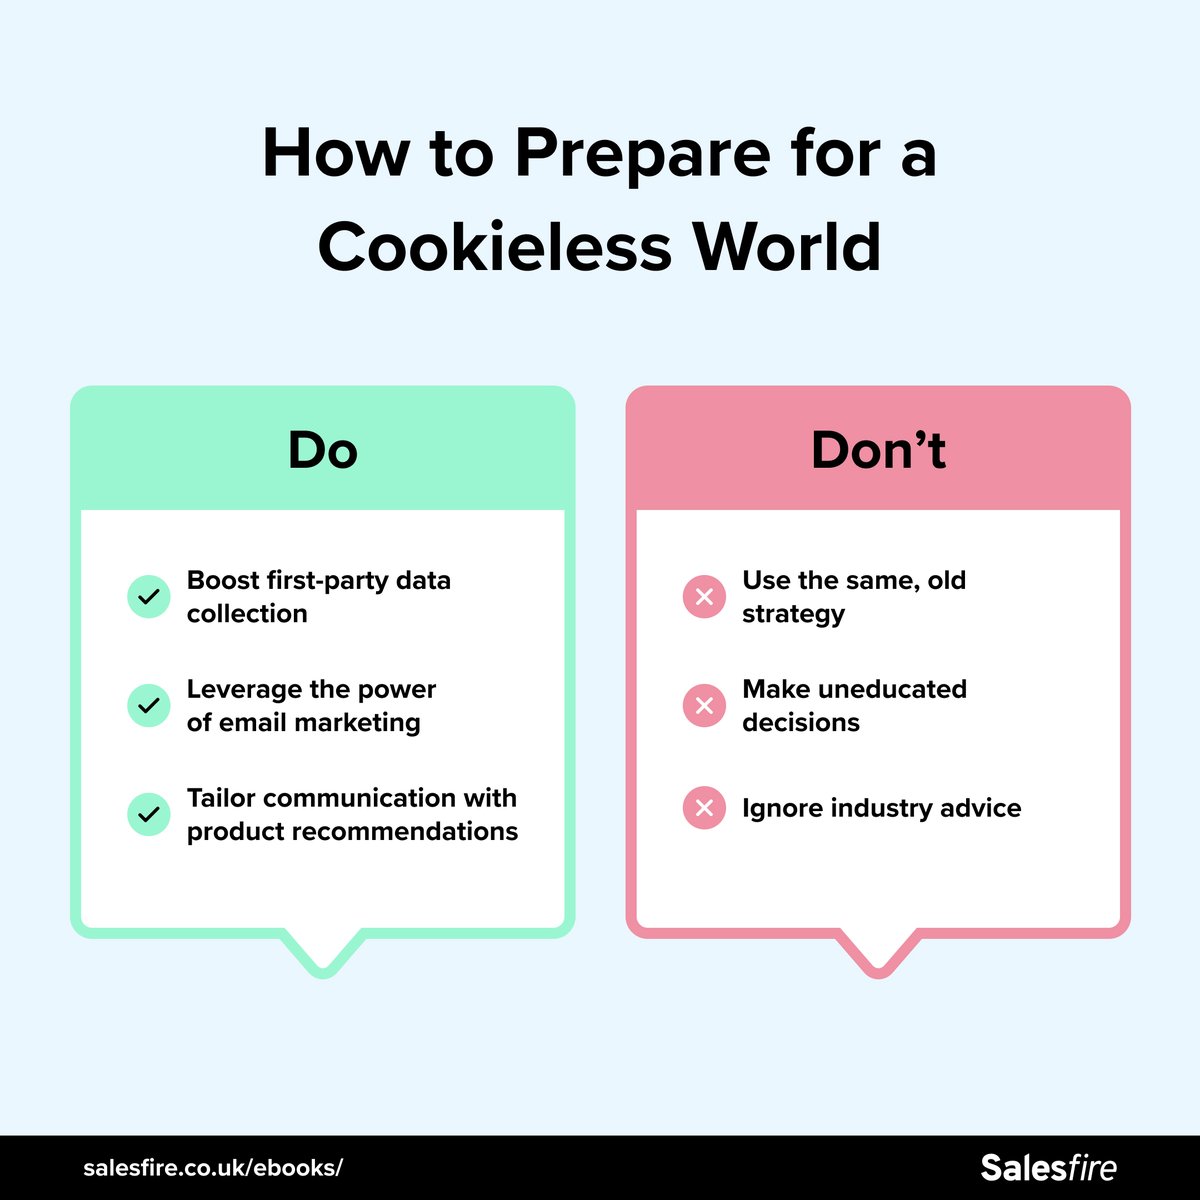 Your eCommerce store relies on third-party cookies. How are you going to thrive without them? 👇

#ebook #cookies #ecommercetrends